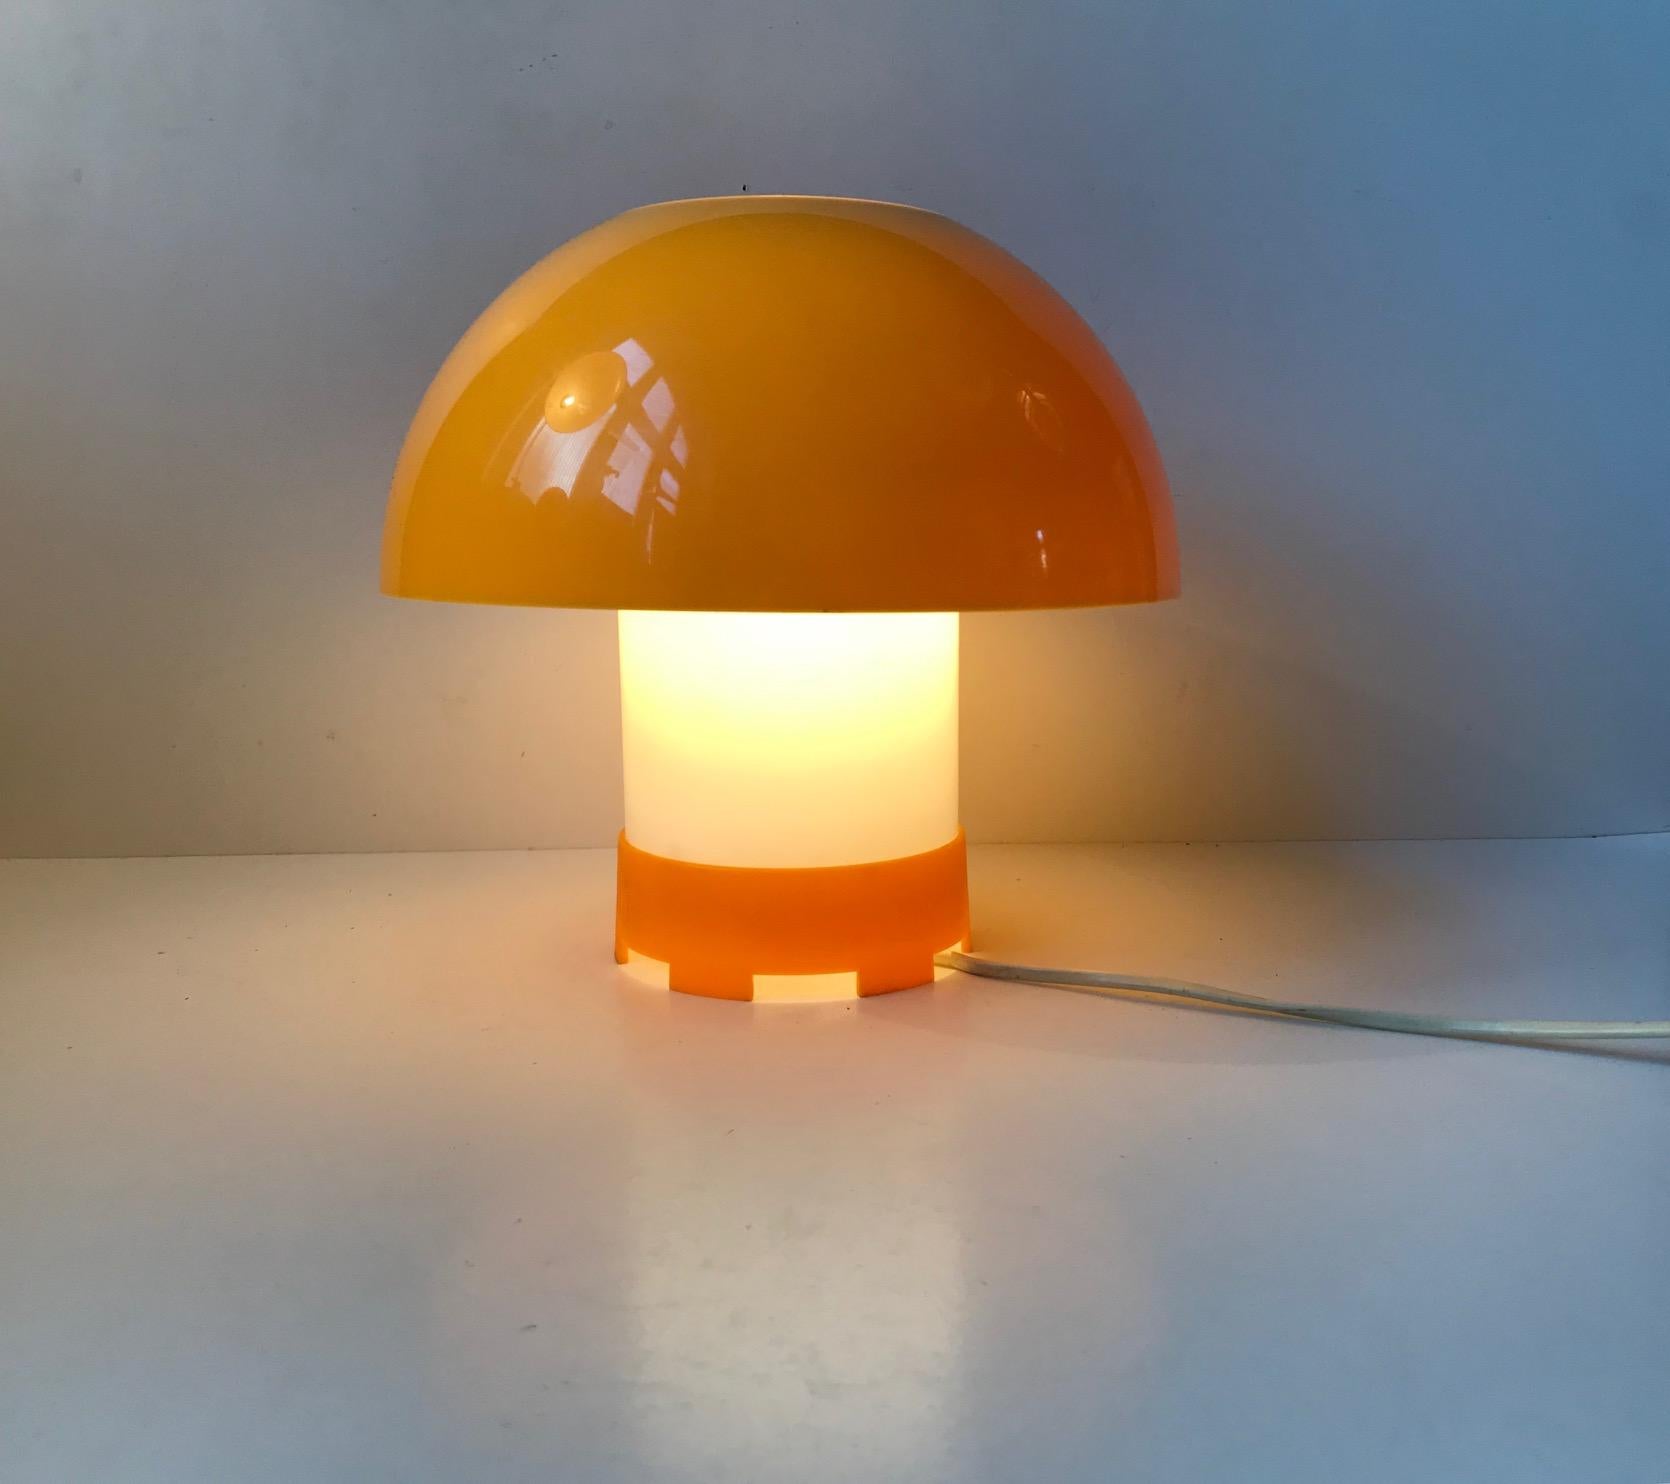 This is a dual colored hybrid table or pendant light designed by the Danish designer Bent Karlby in the late 1960s. It is made from yellow and white acrylic and was manufactured by ASK Belysning in the early 1970s. Intact, and in clean vintage